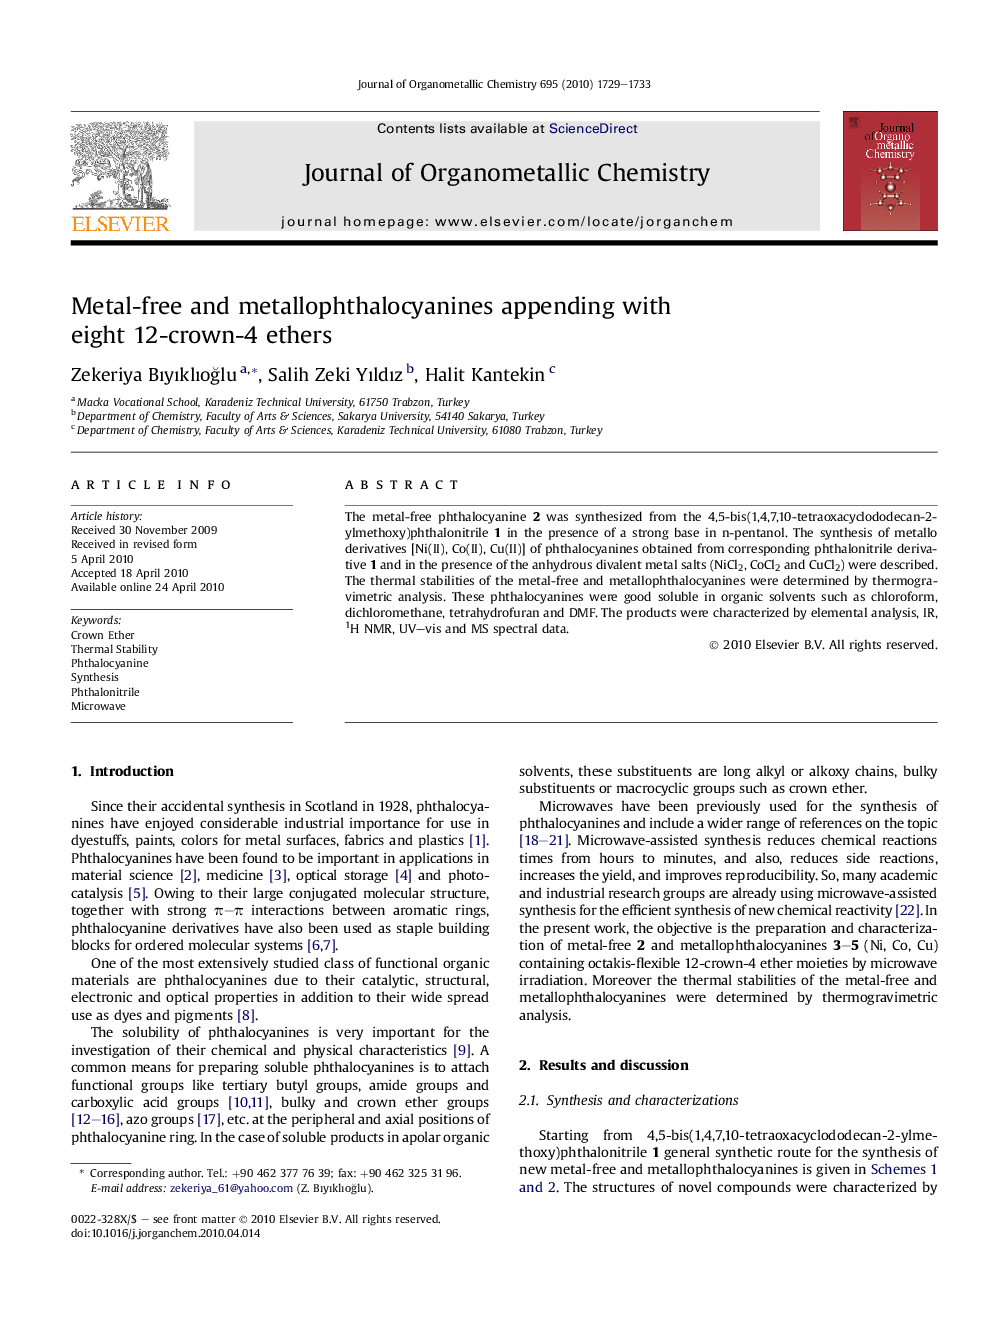 Metal-free and metallophthalocyanines appending with eight 12-crown-4 ethers